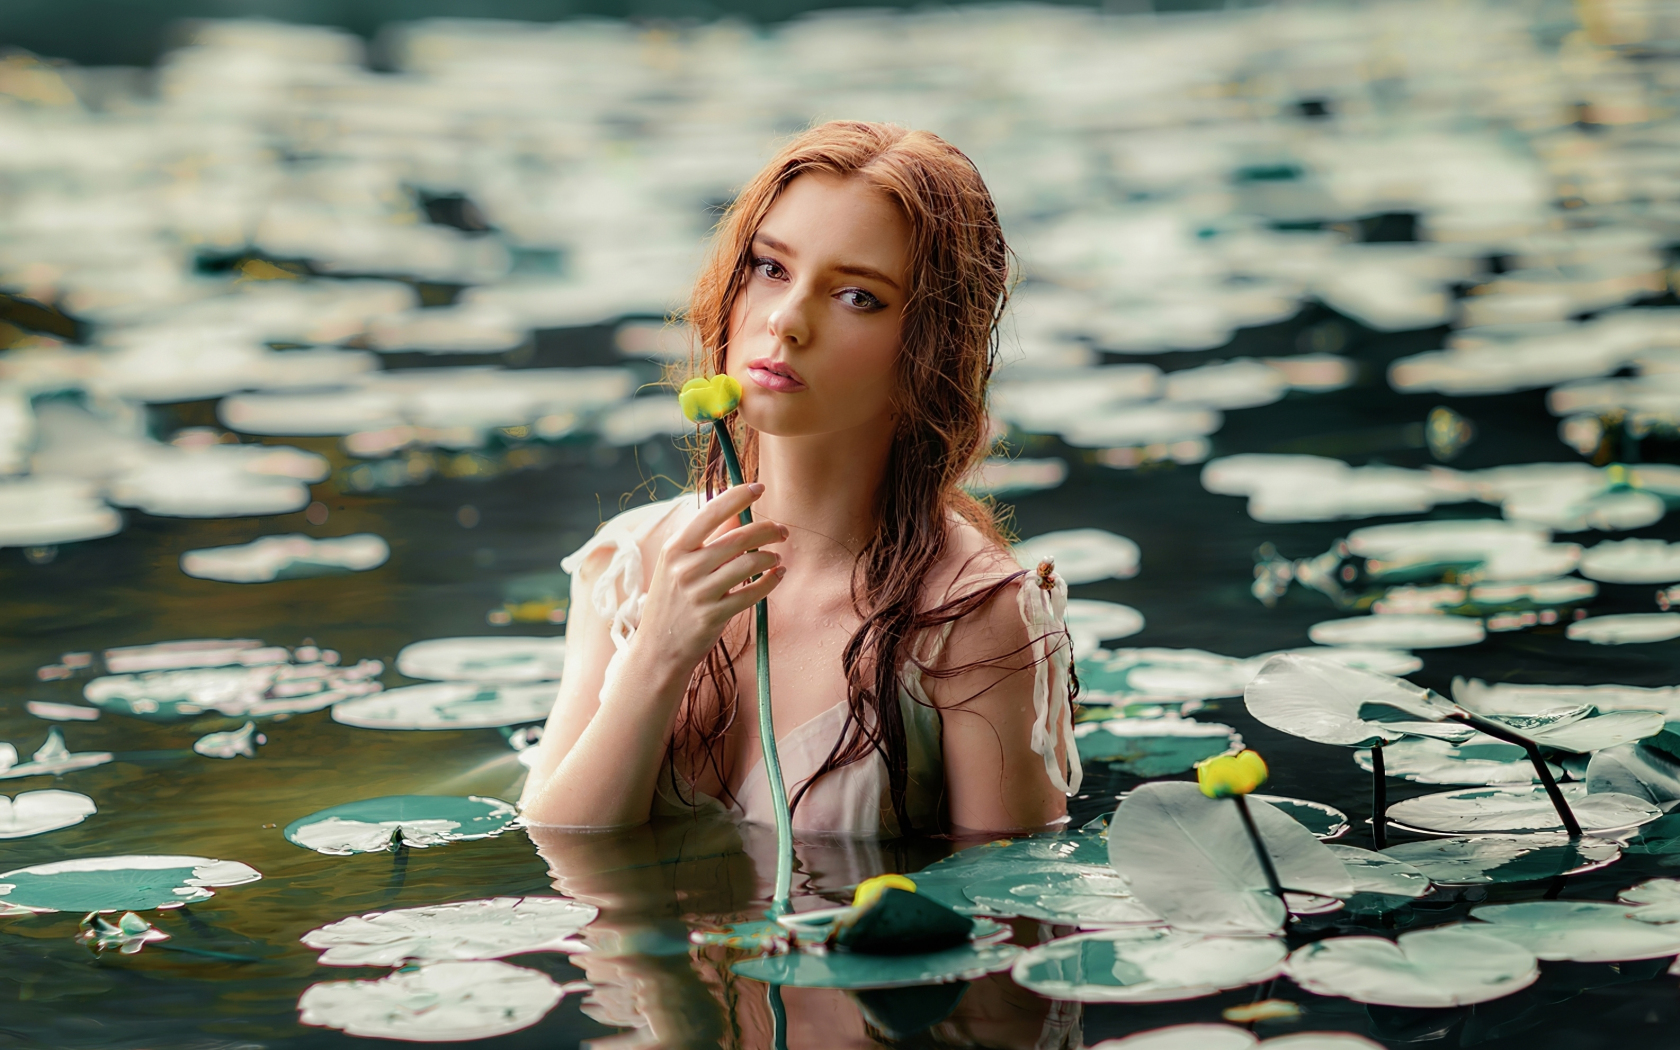 Download Wallpaper 1680x1050 Girl With Flowers Outdoor Lake 1610 Widescreen 1680x1050 Hd